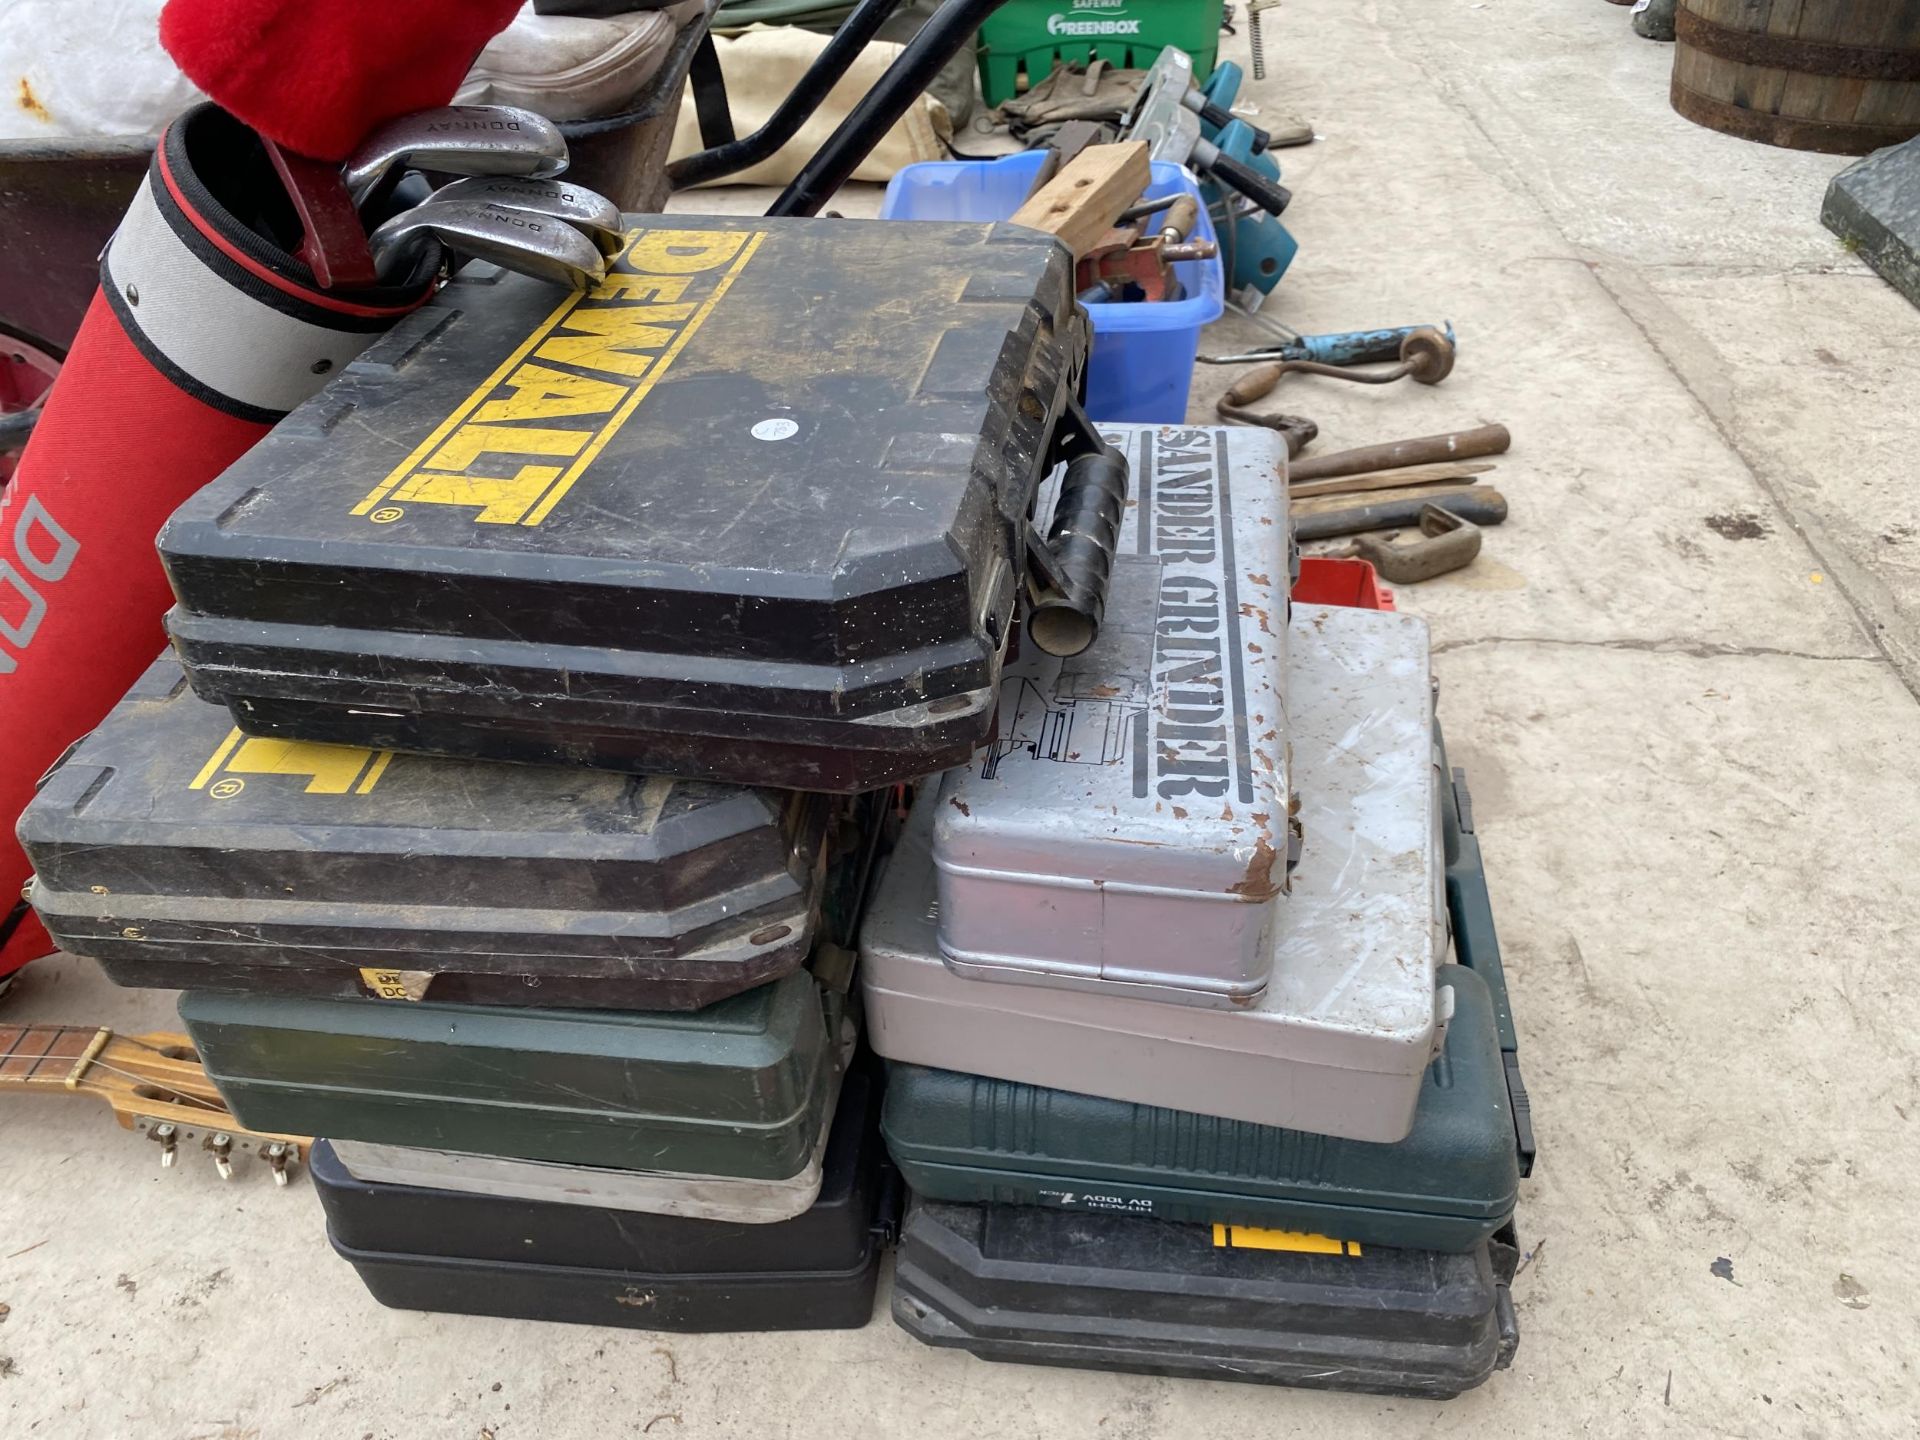 TEN ASSORTED POWER TOOL BOXES AND A BOSCH HAMMER DRILL - Image 2 of 3